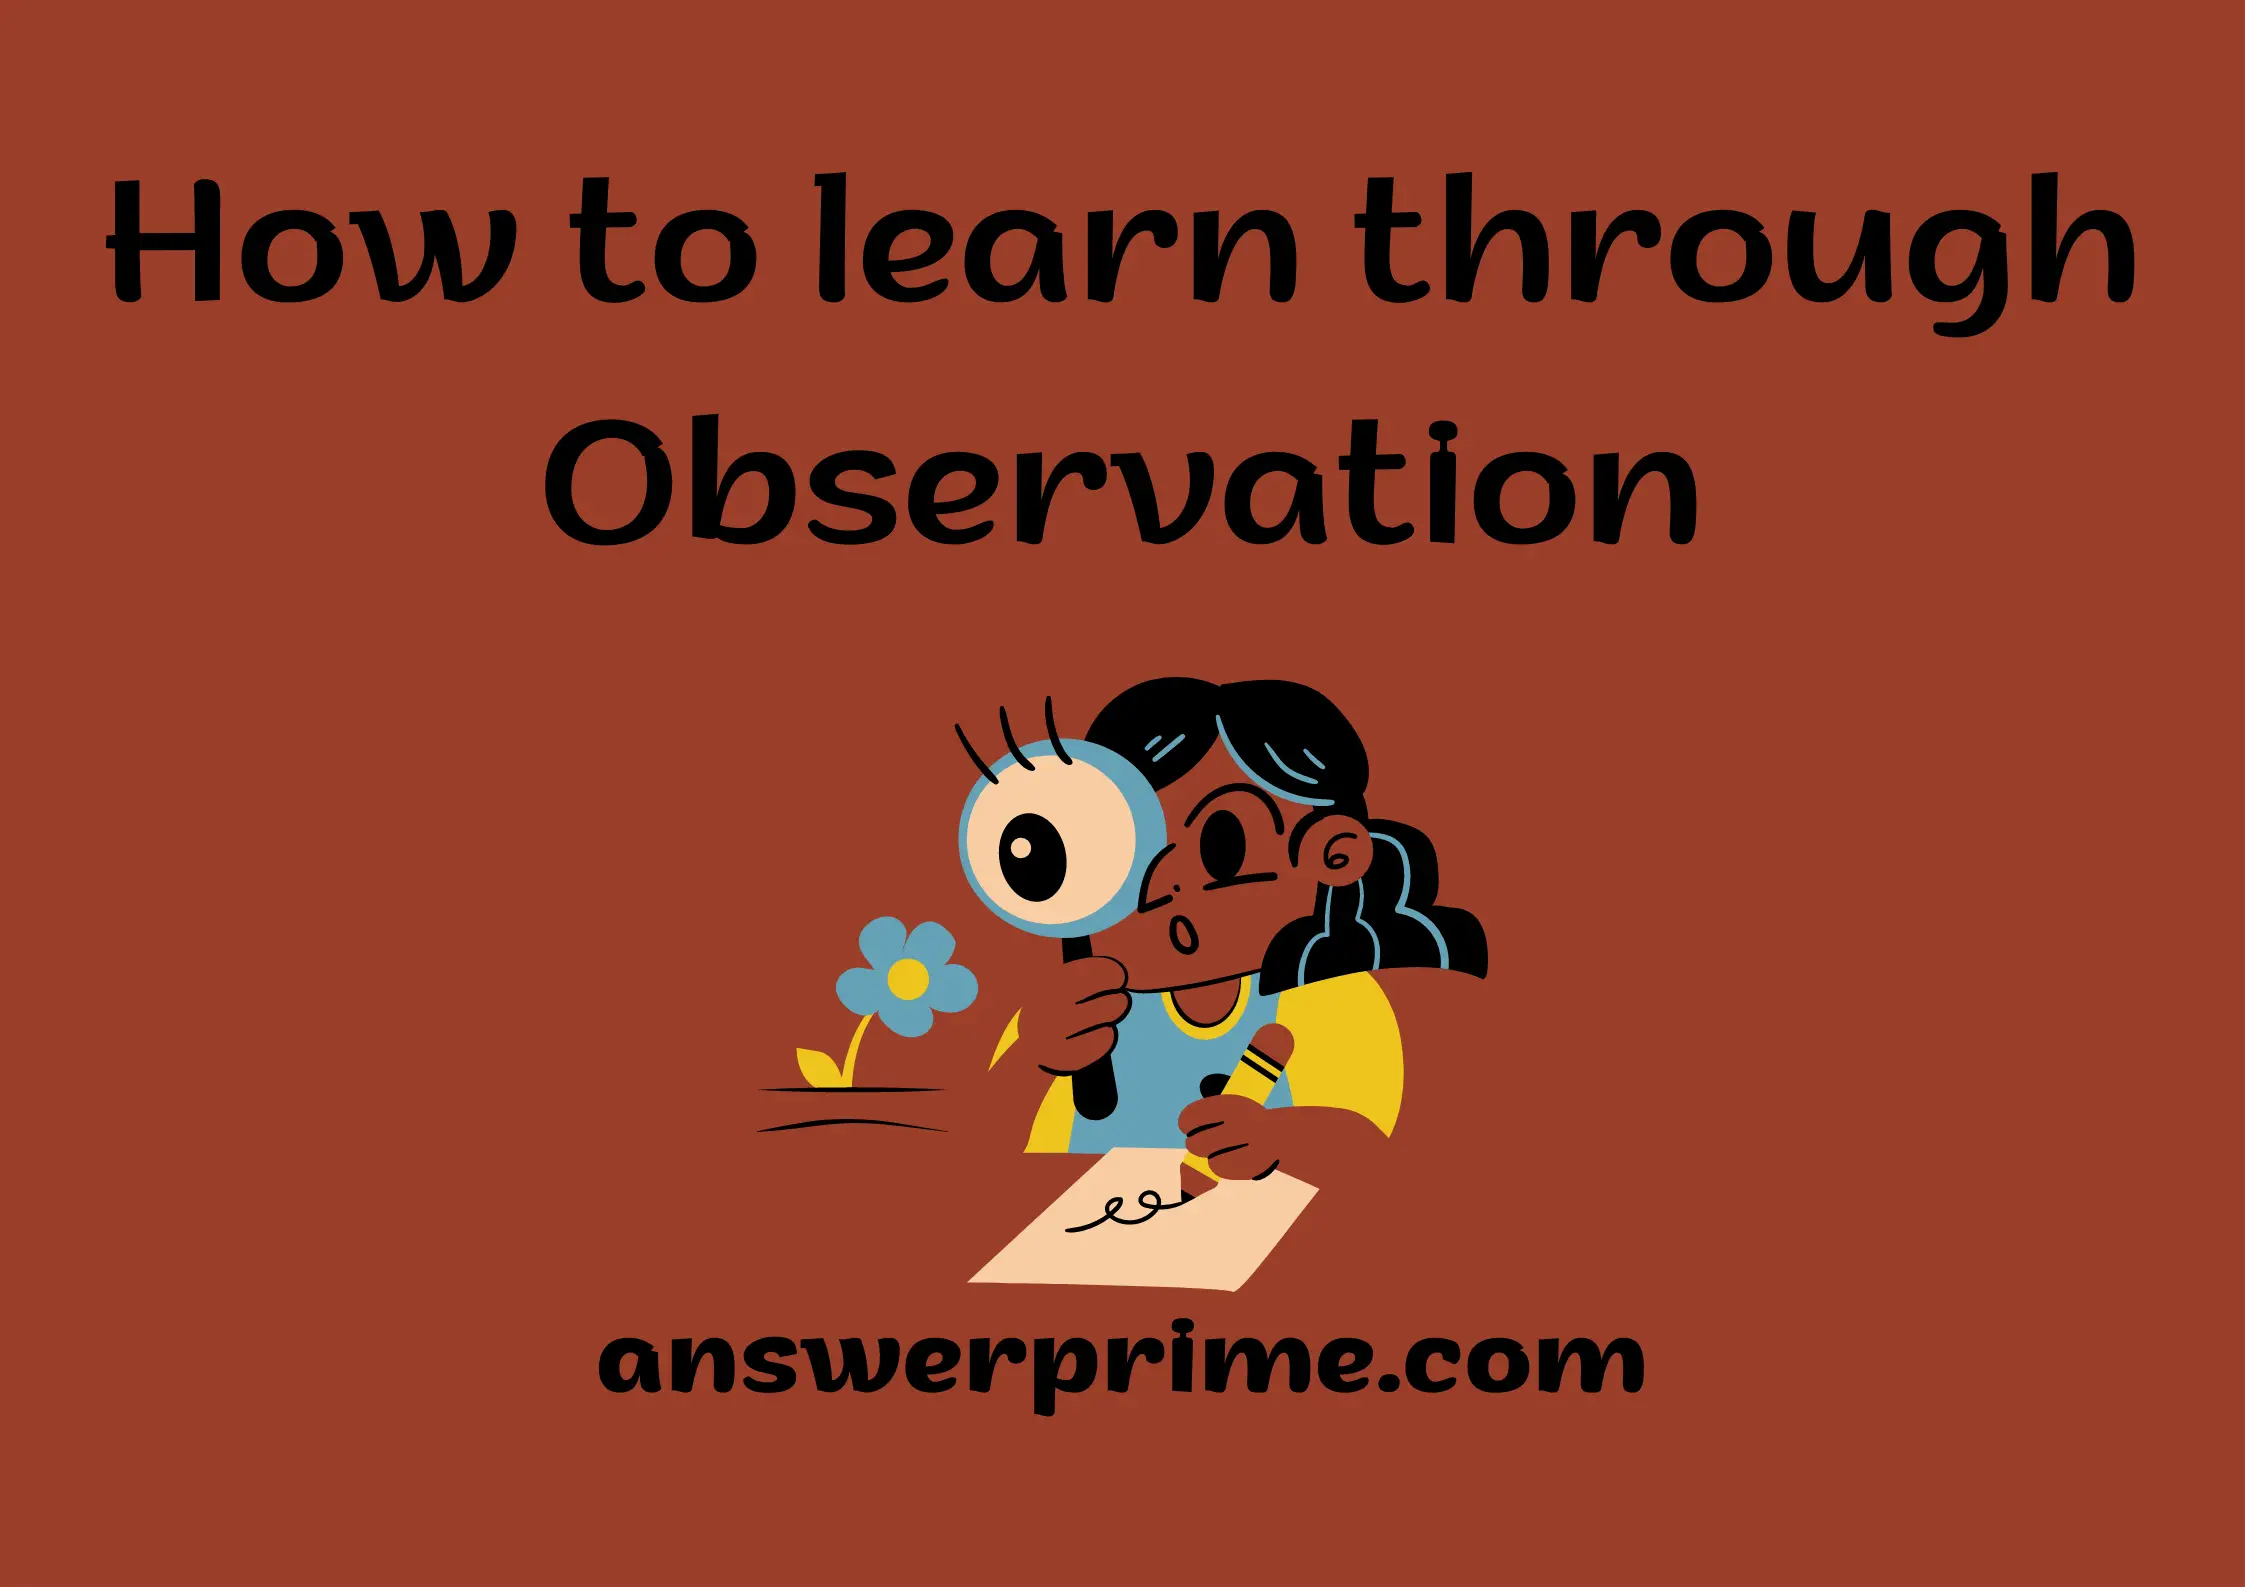 How to learn through Observation